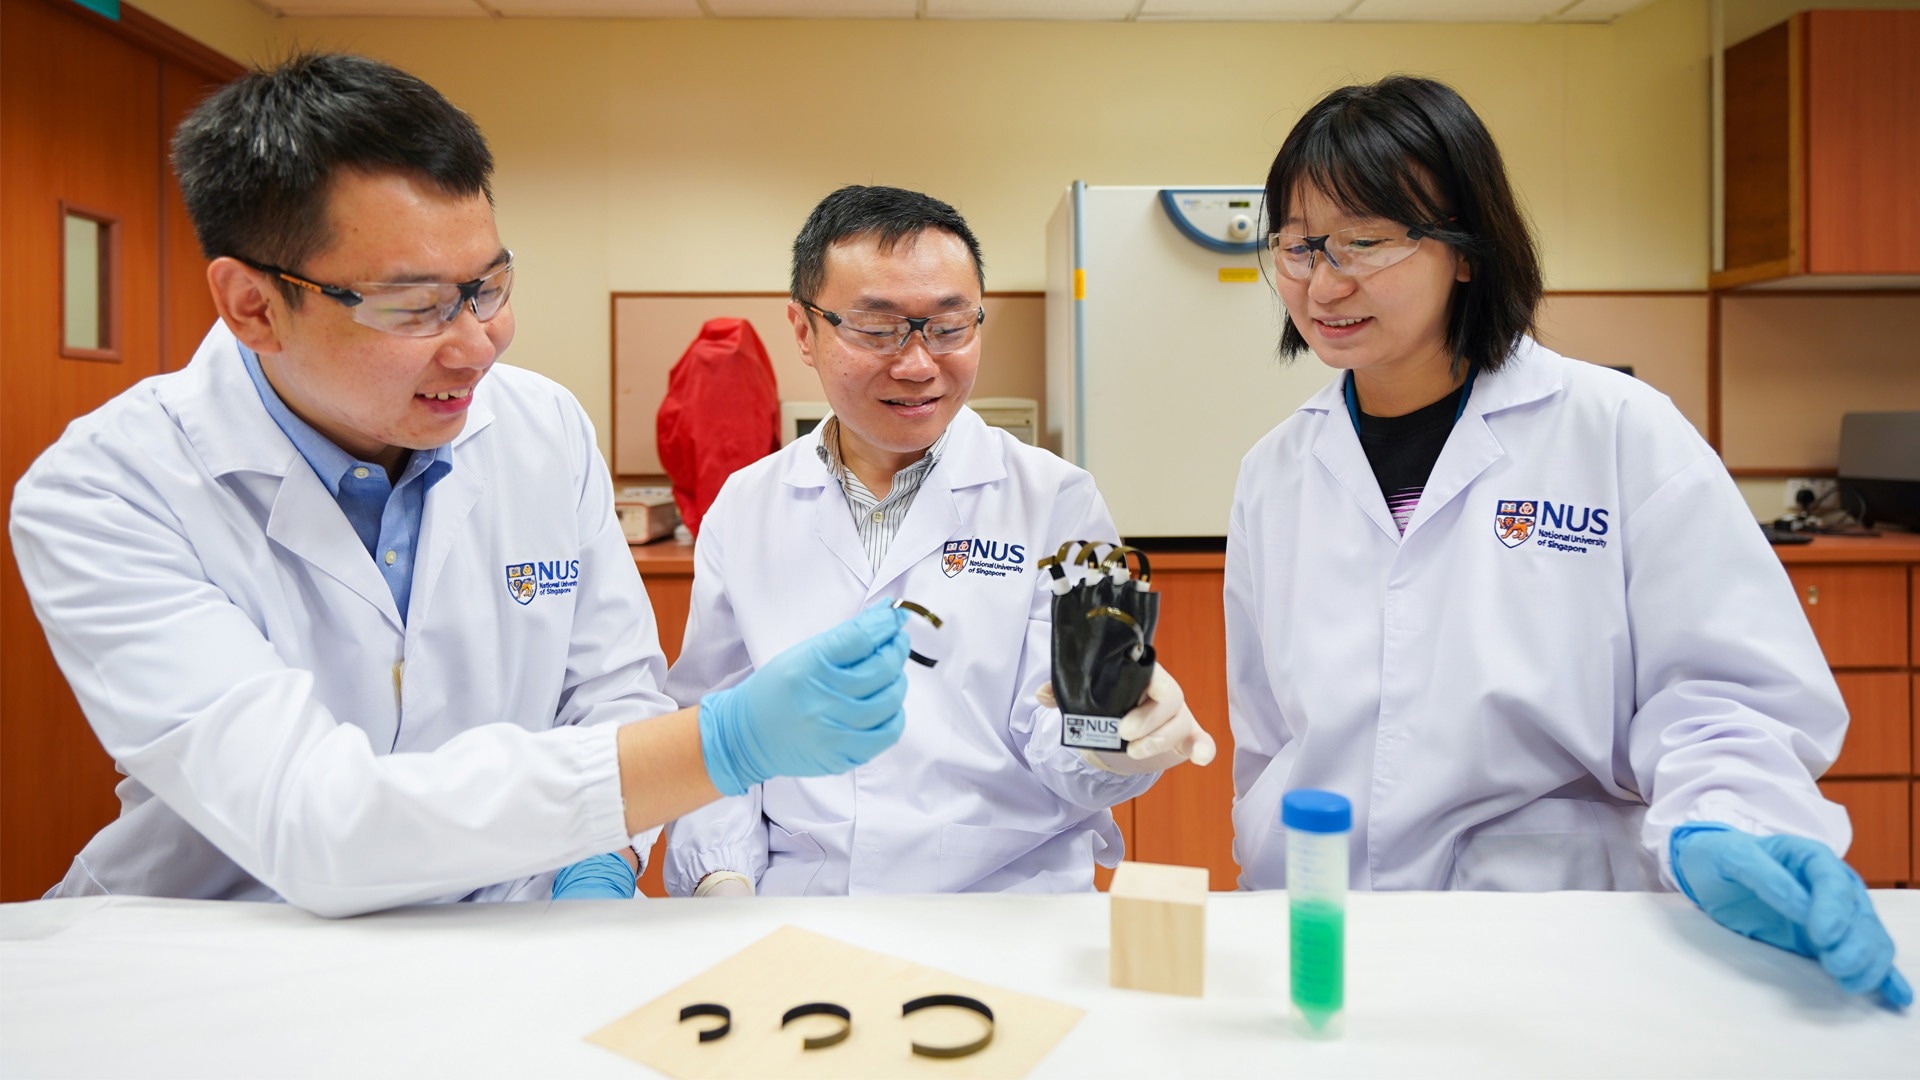 Asst Prof Tan Swee Ching (center), together with team members Mr Qu Hao (left) and Ms Bai Lulu ((right), have developed a wooden gripper that is driven by changes in moisture, temperature, and lighting in the environment.